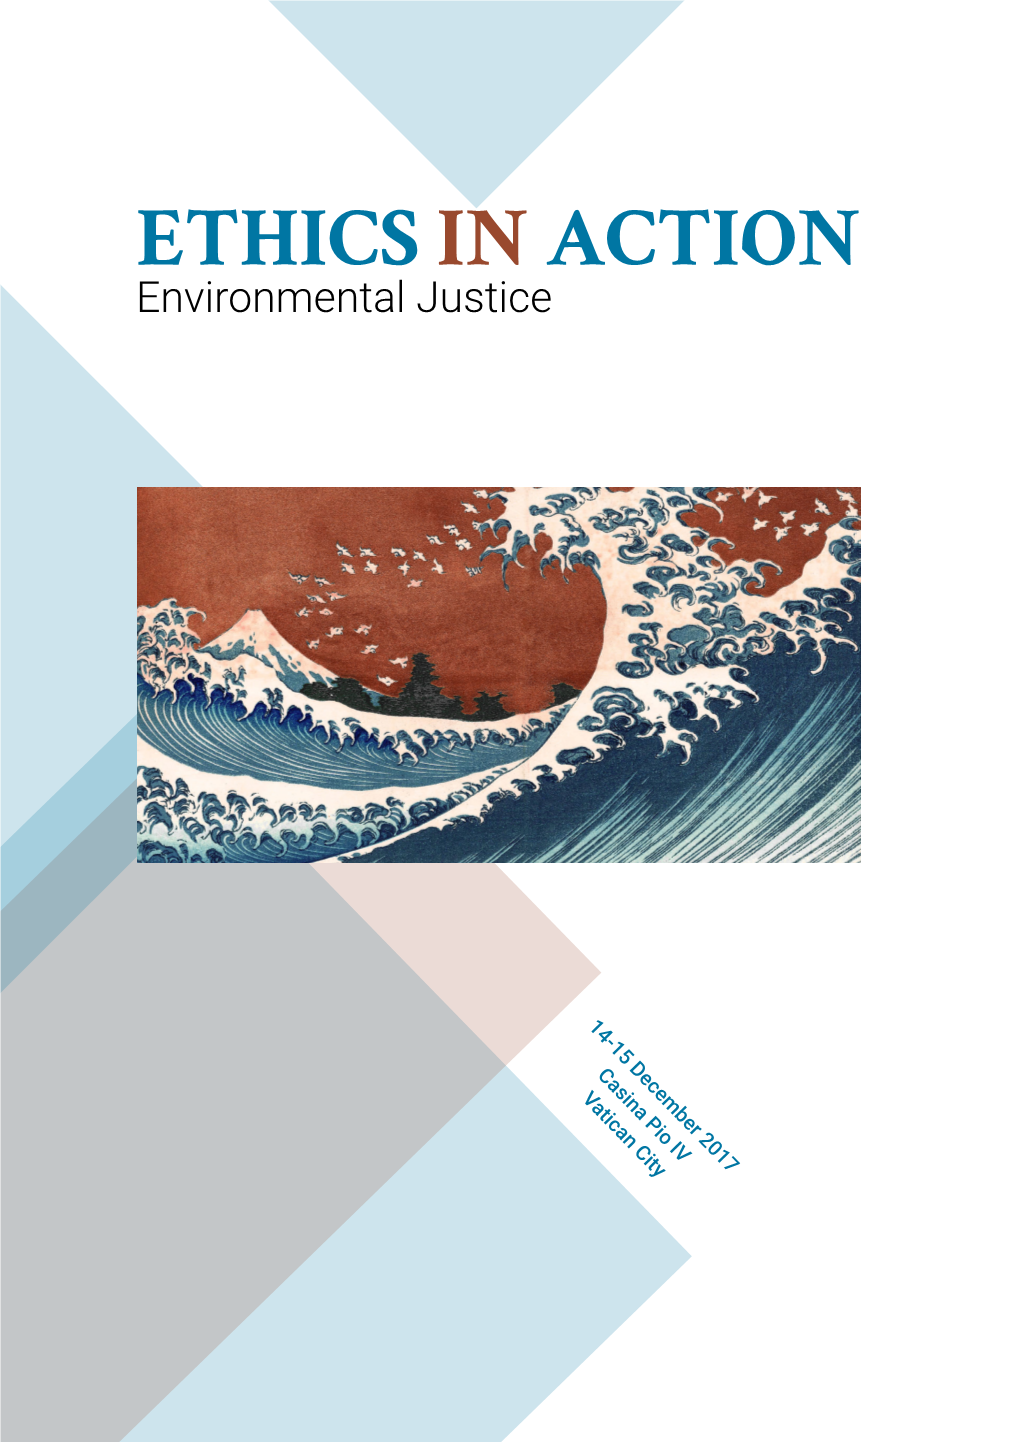 Ethics in Action – Environmental Justice